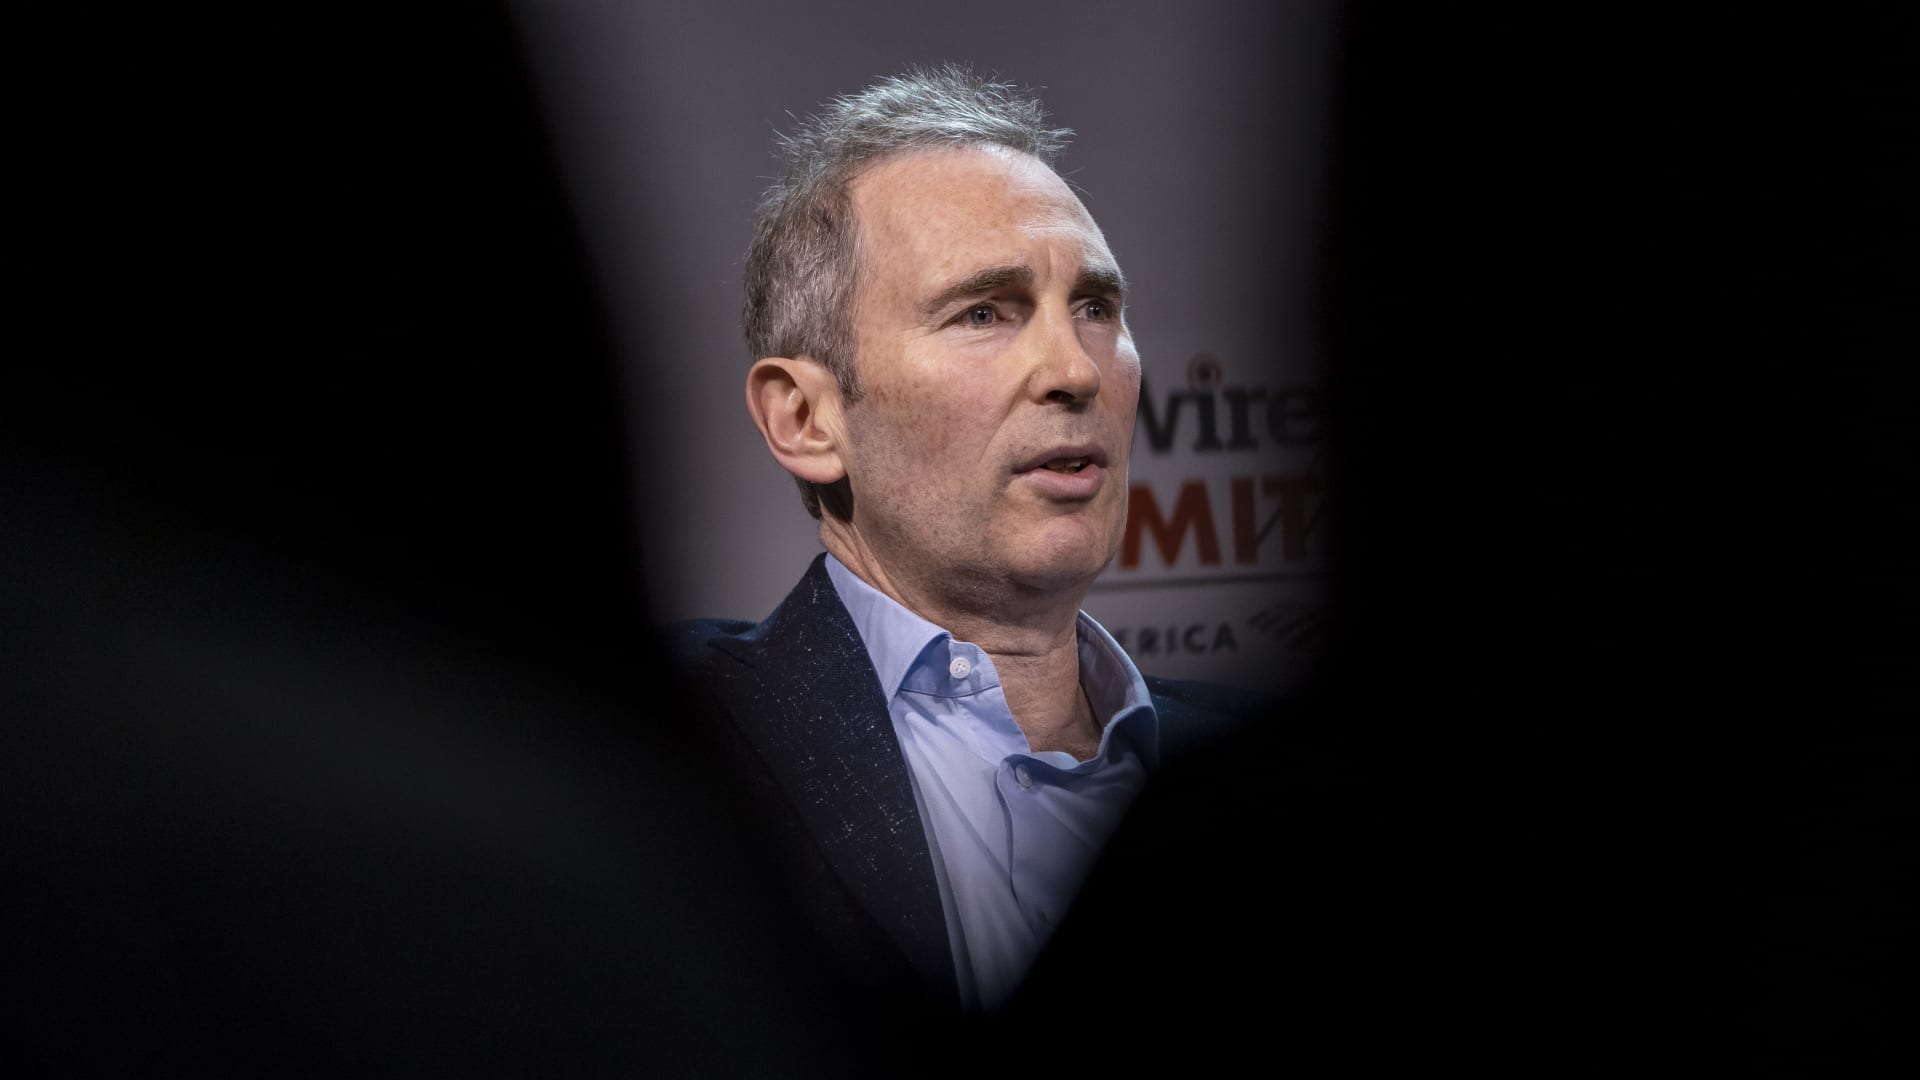 Amazon CEO Andy Jassy says layoffs will continue into next year